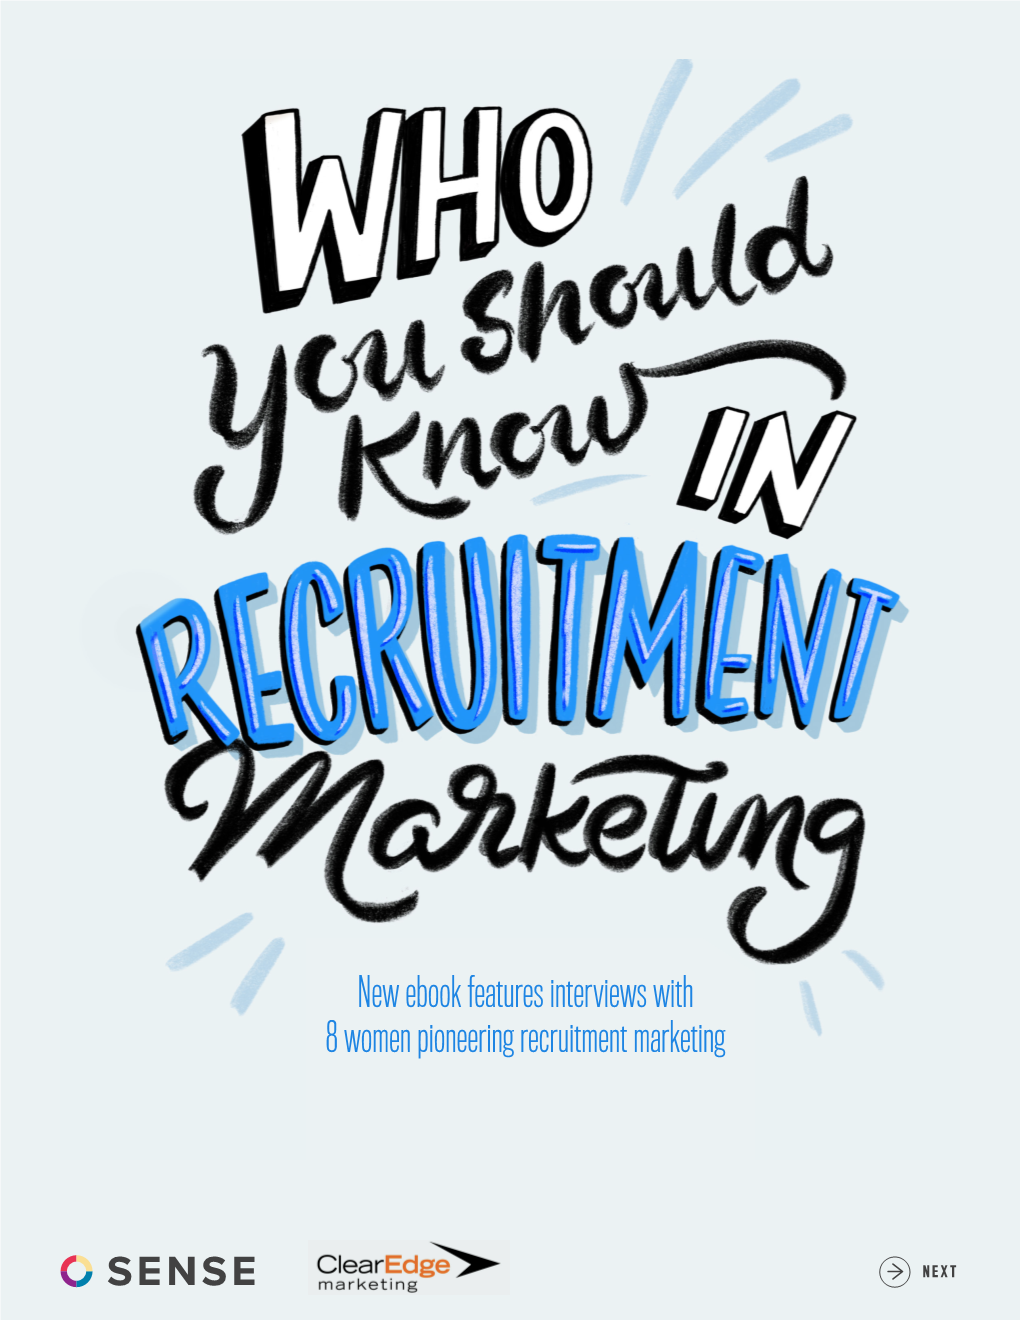 New Ebook Features Interviews with 8 Women Pioneering Recruitment Marketing